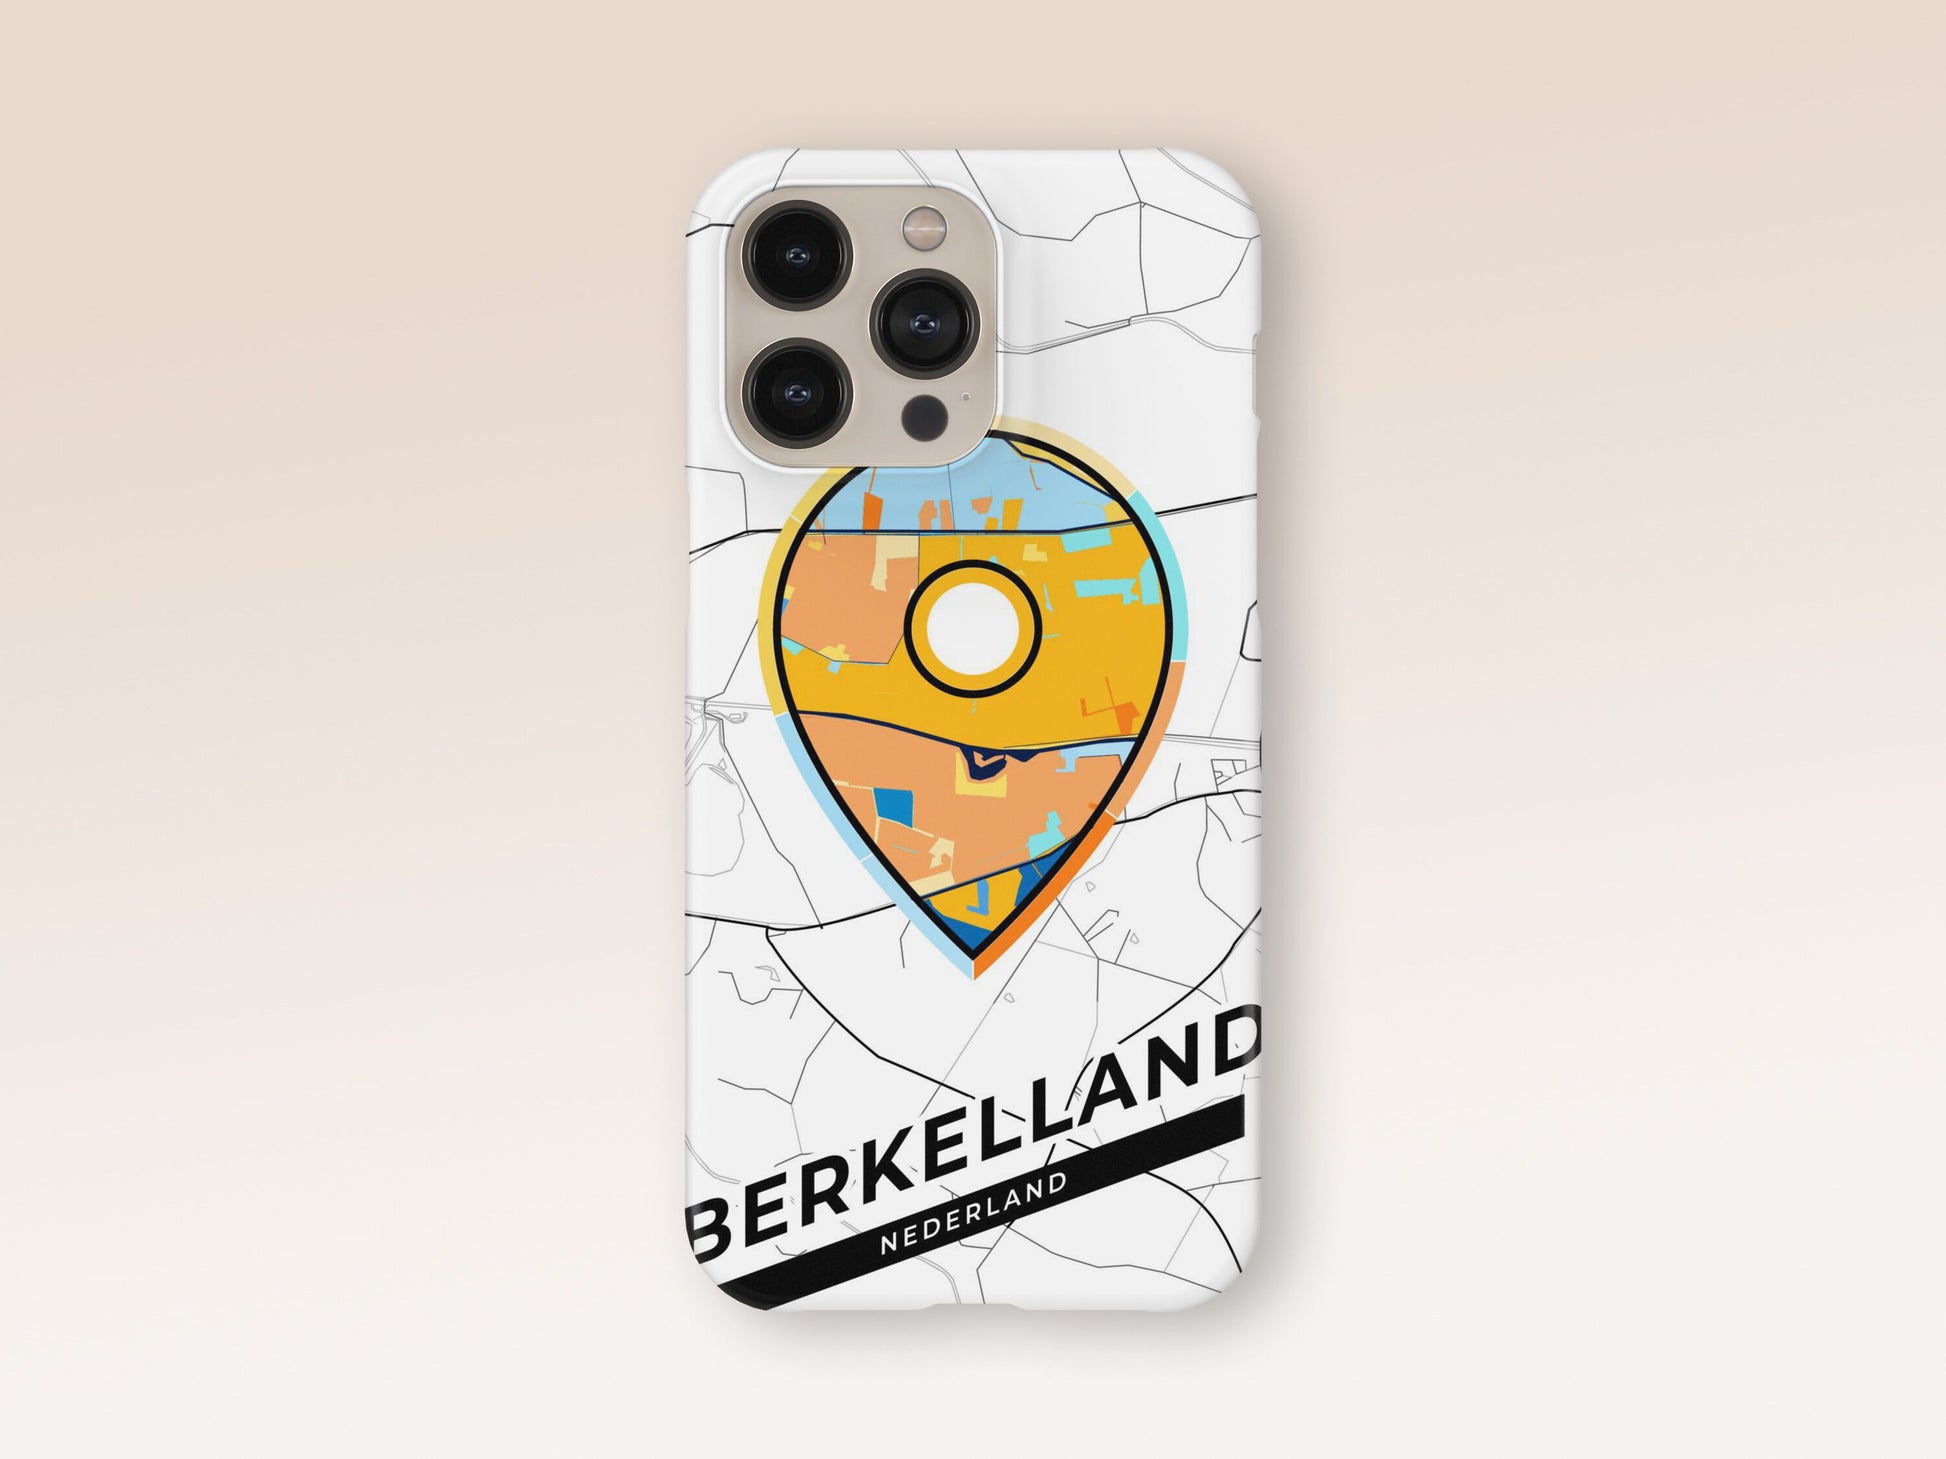 Berkelland Netherlands slim phone case with colorful icon. Birthday, wedding or housewarming gift. Couple match cases. 1